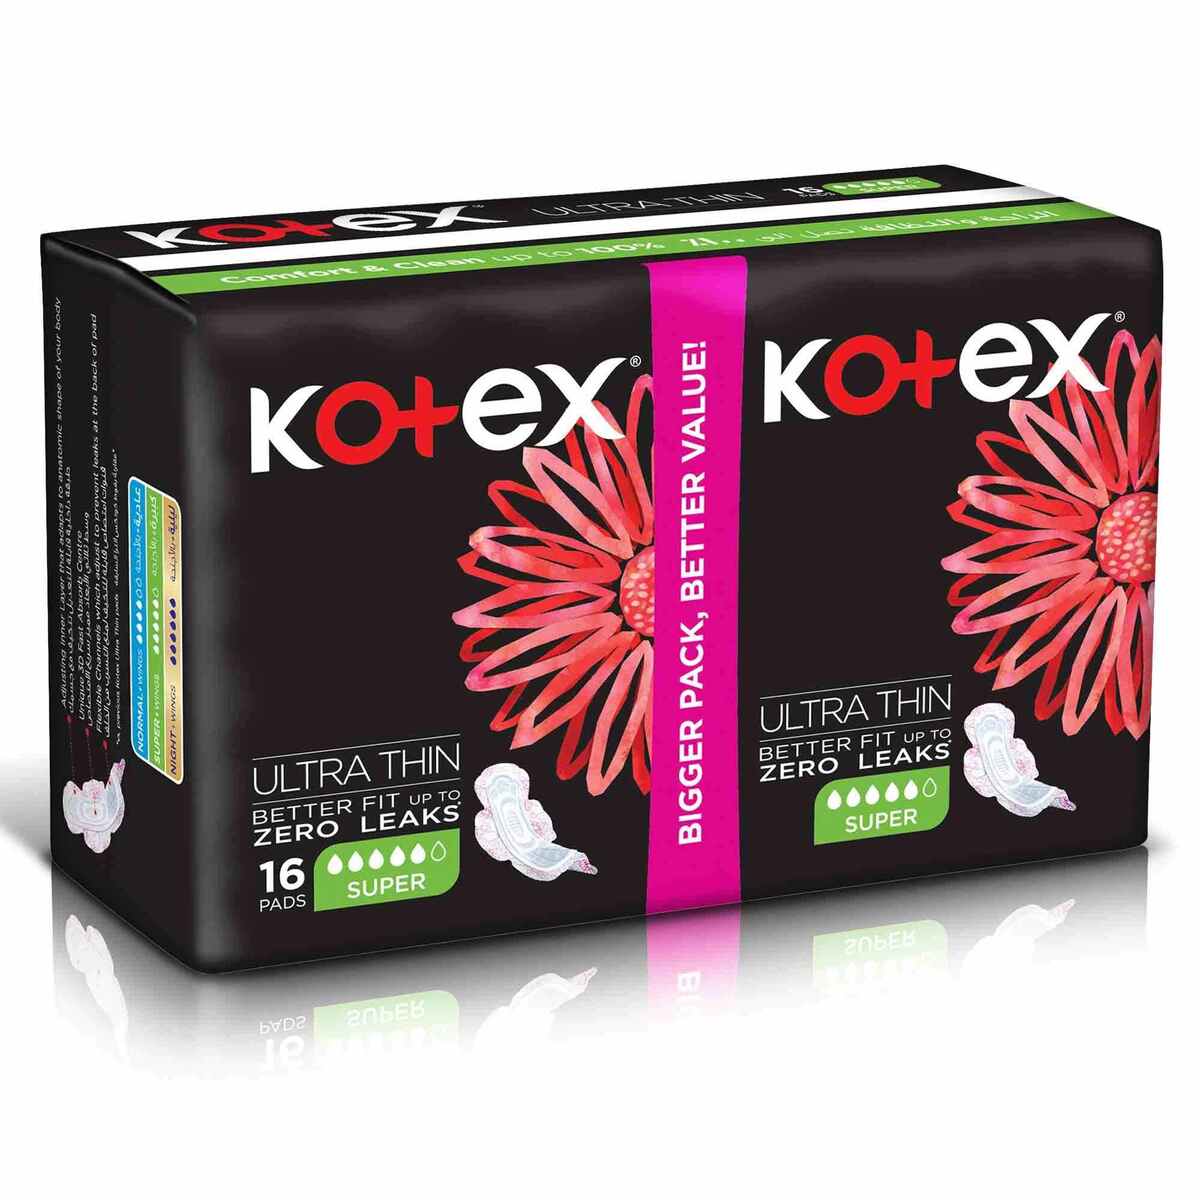 Kotex Natural Ultra Thin 100% Cotton Super Size Sanitary Pads with Wings 16 pcs